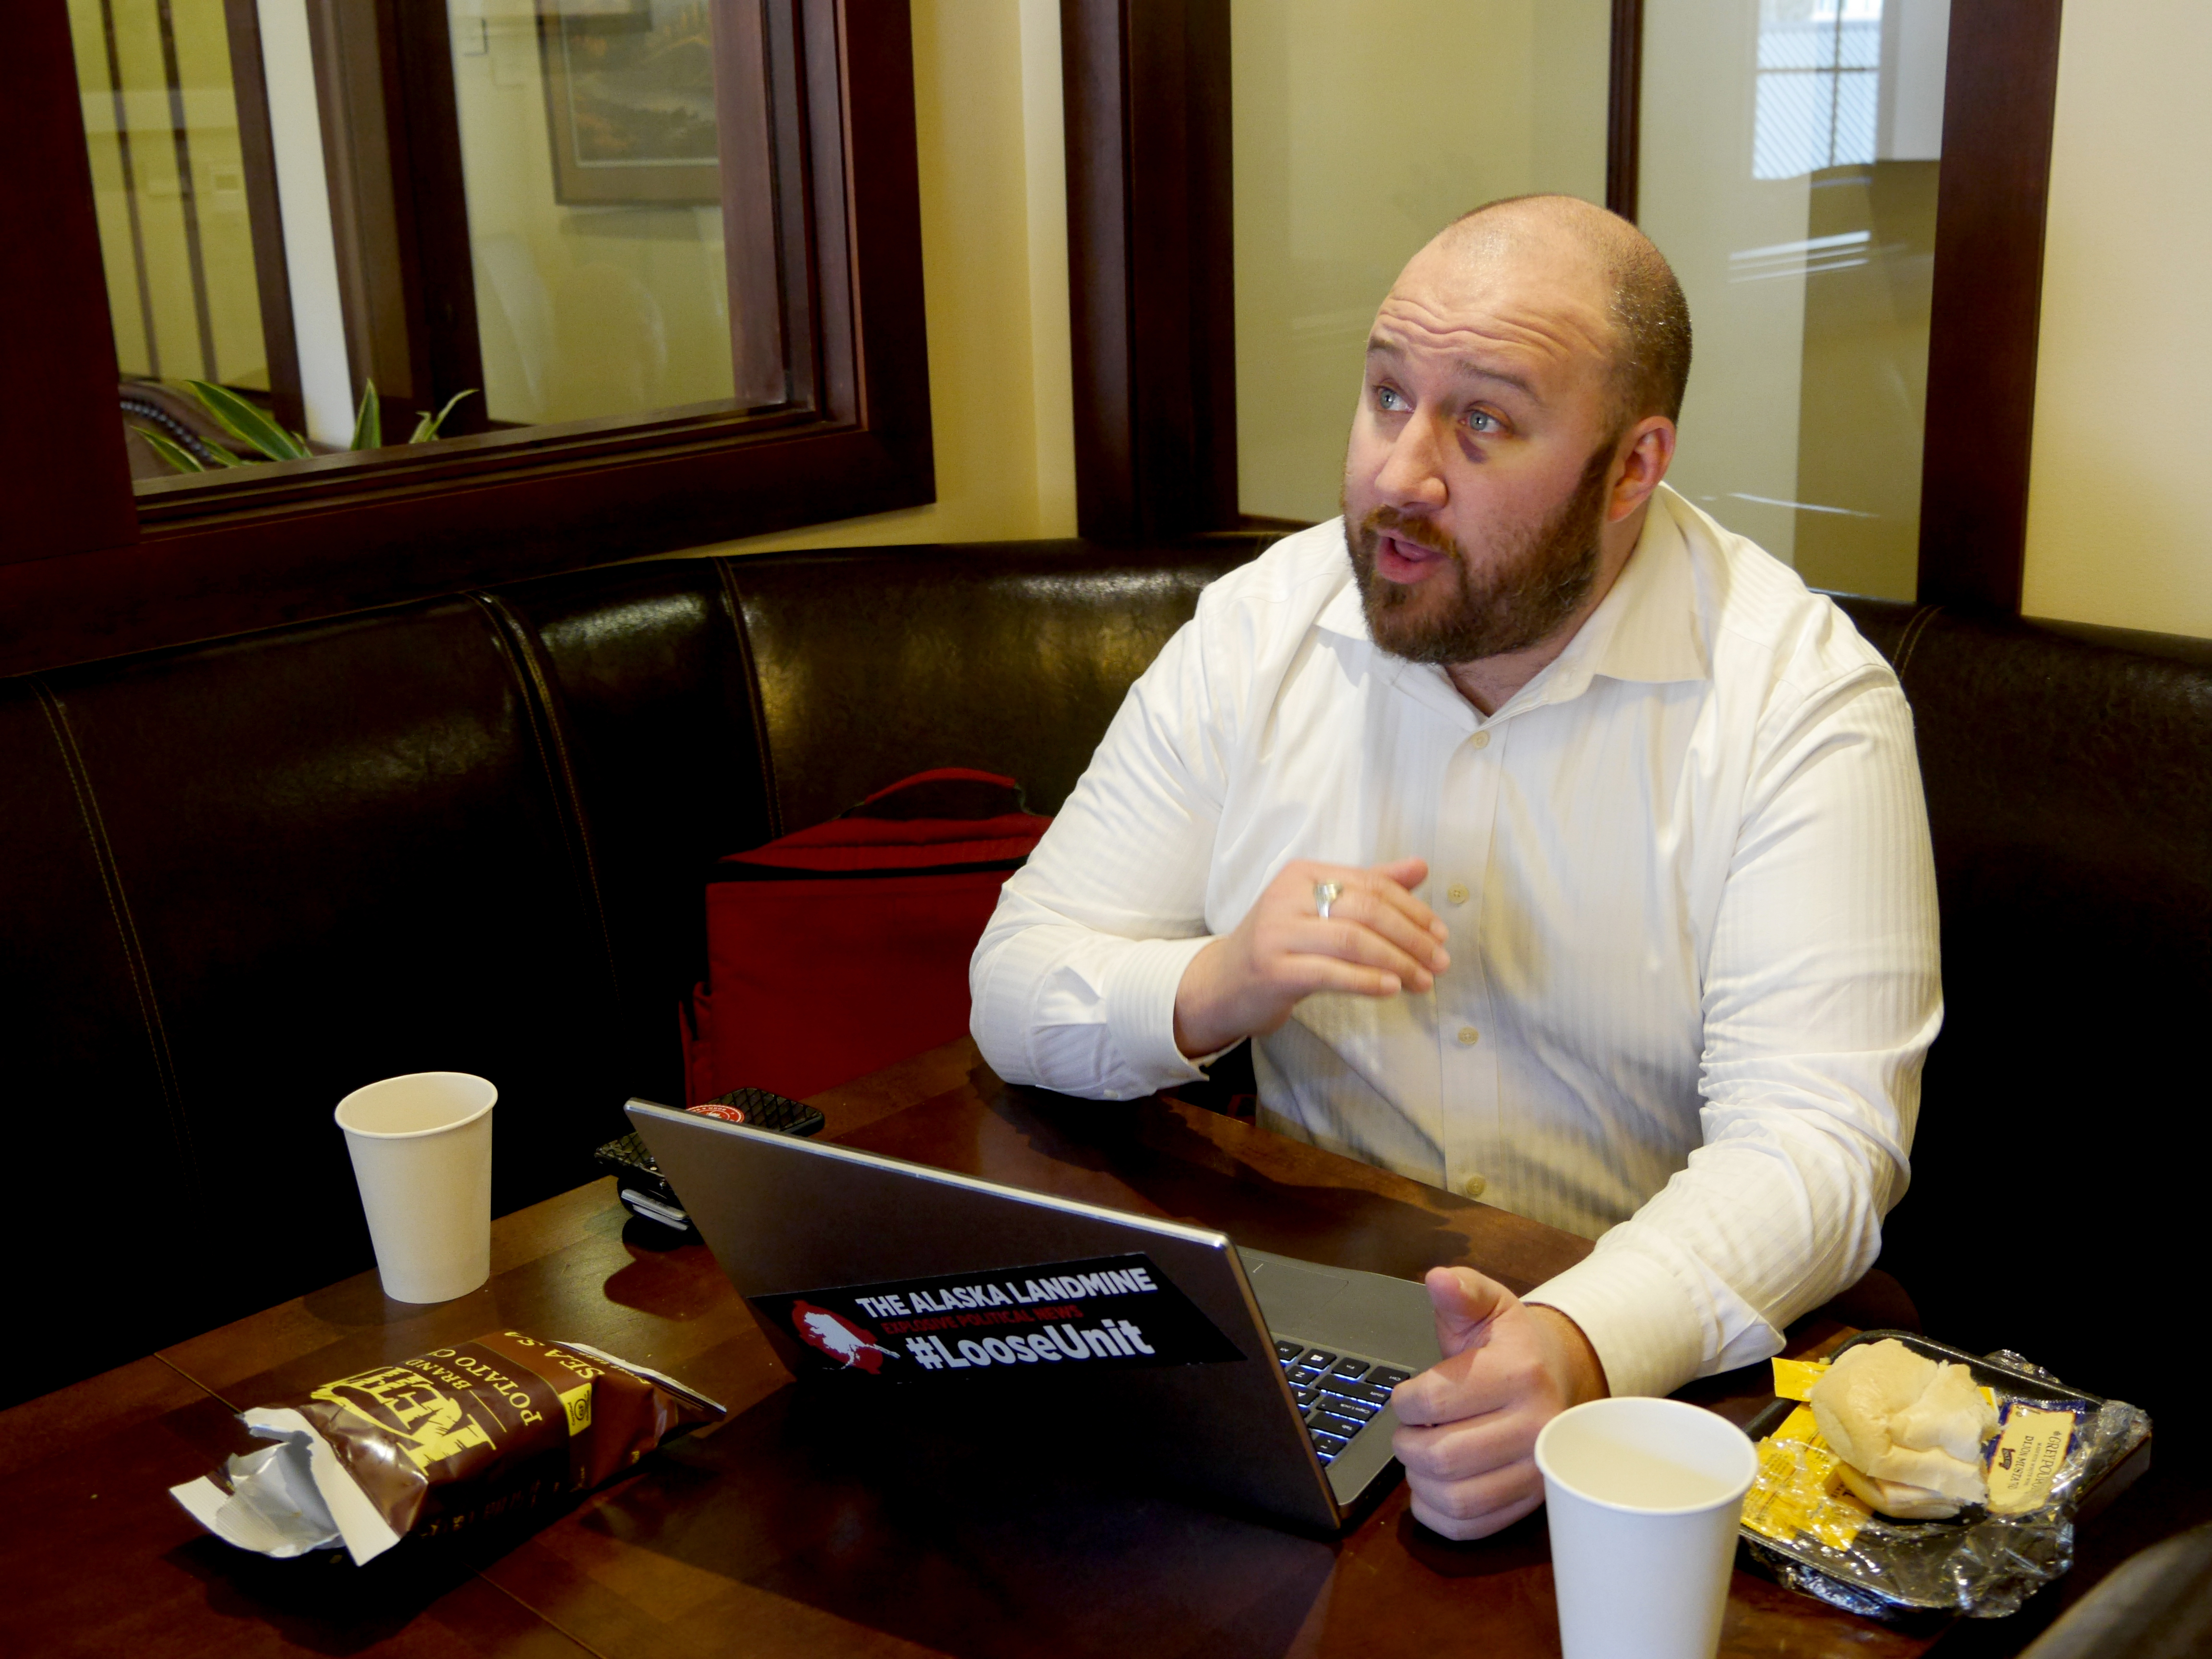 Blogger Jeff Landfield of The Alaska Landmine works from his “office,” a public lounge in the Capitol in Juneau while talking with Alaska's Energy Desk reporter Nat Herz on March 25, 2019. Landfield said a legislative staffer gave him the black eye at a bar on March 22.